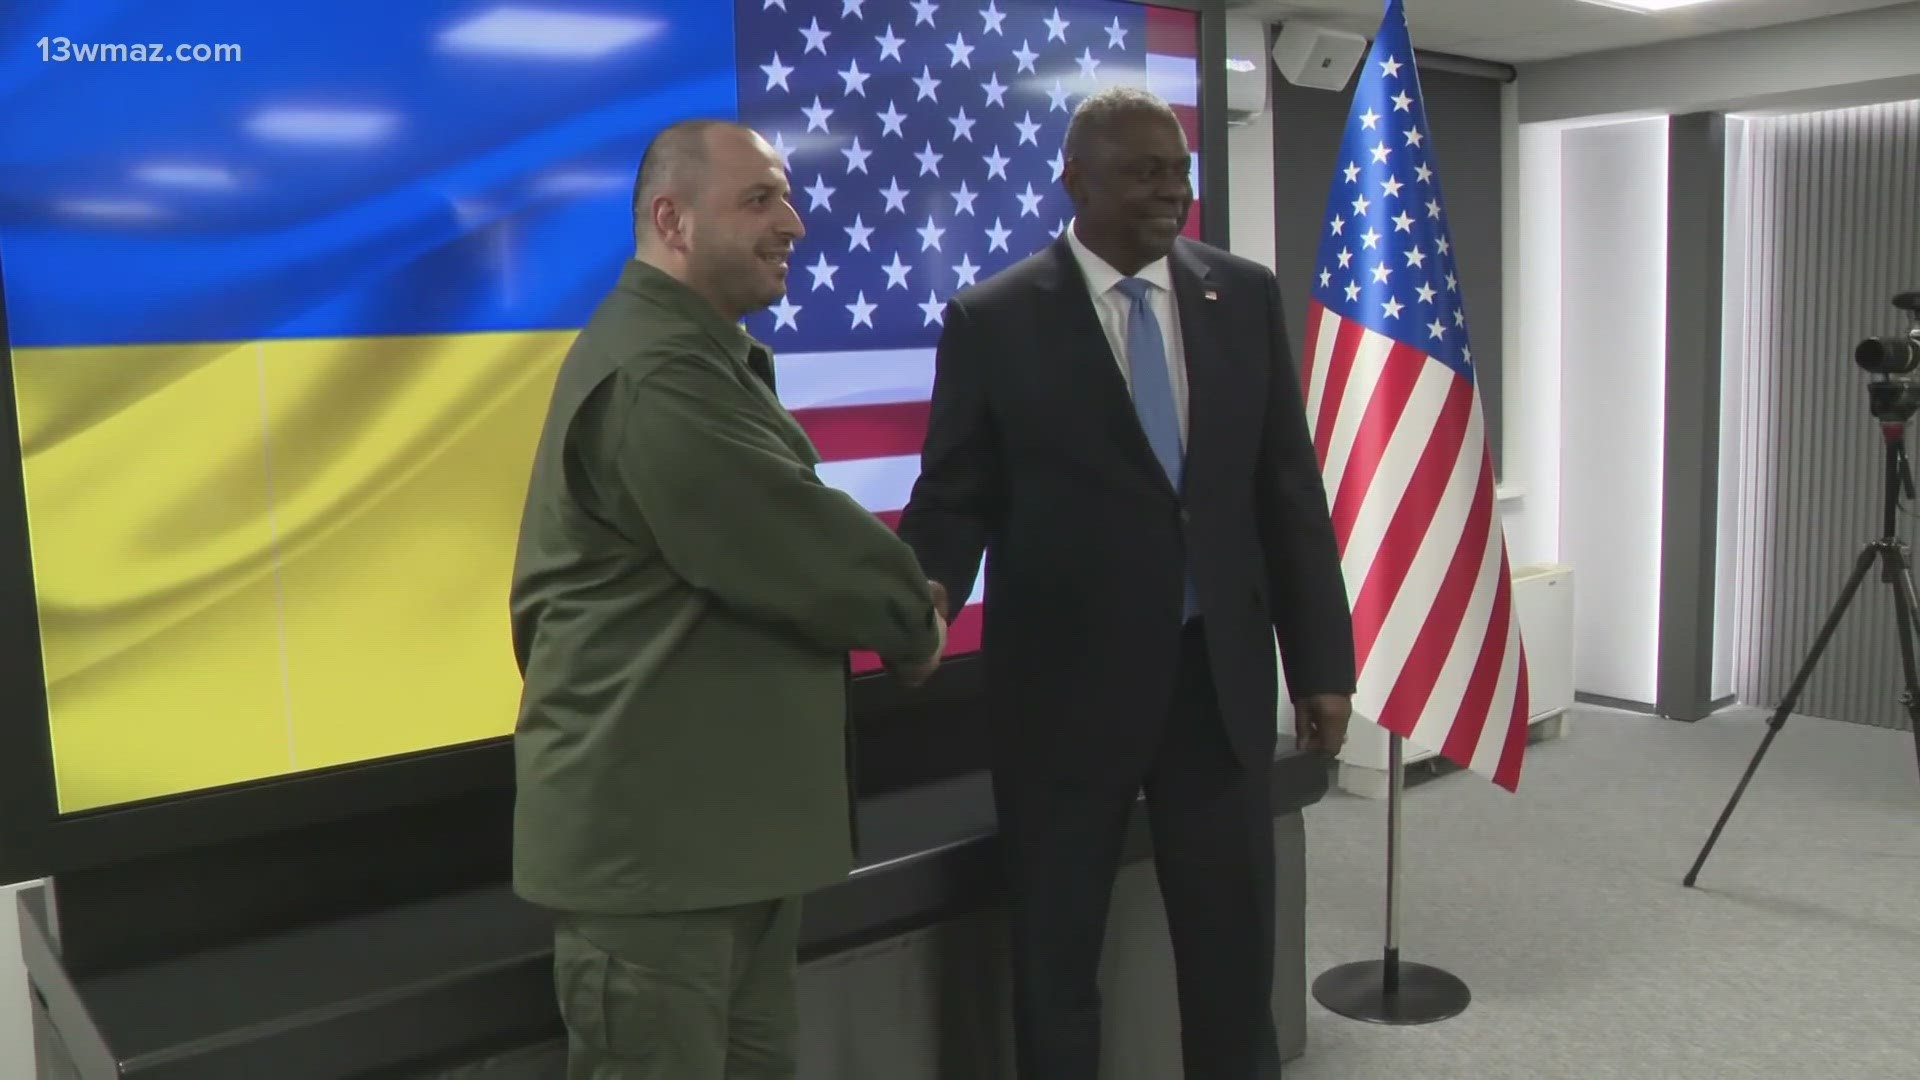 Defense Secretary Lloyd Austin met with counterparts in Ukraine and emphasized the resilence and need of the Ukrainian people and government.